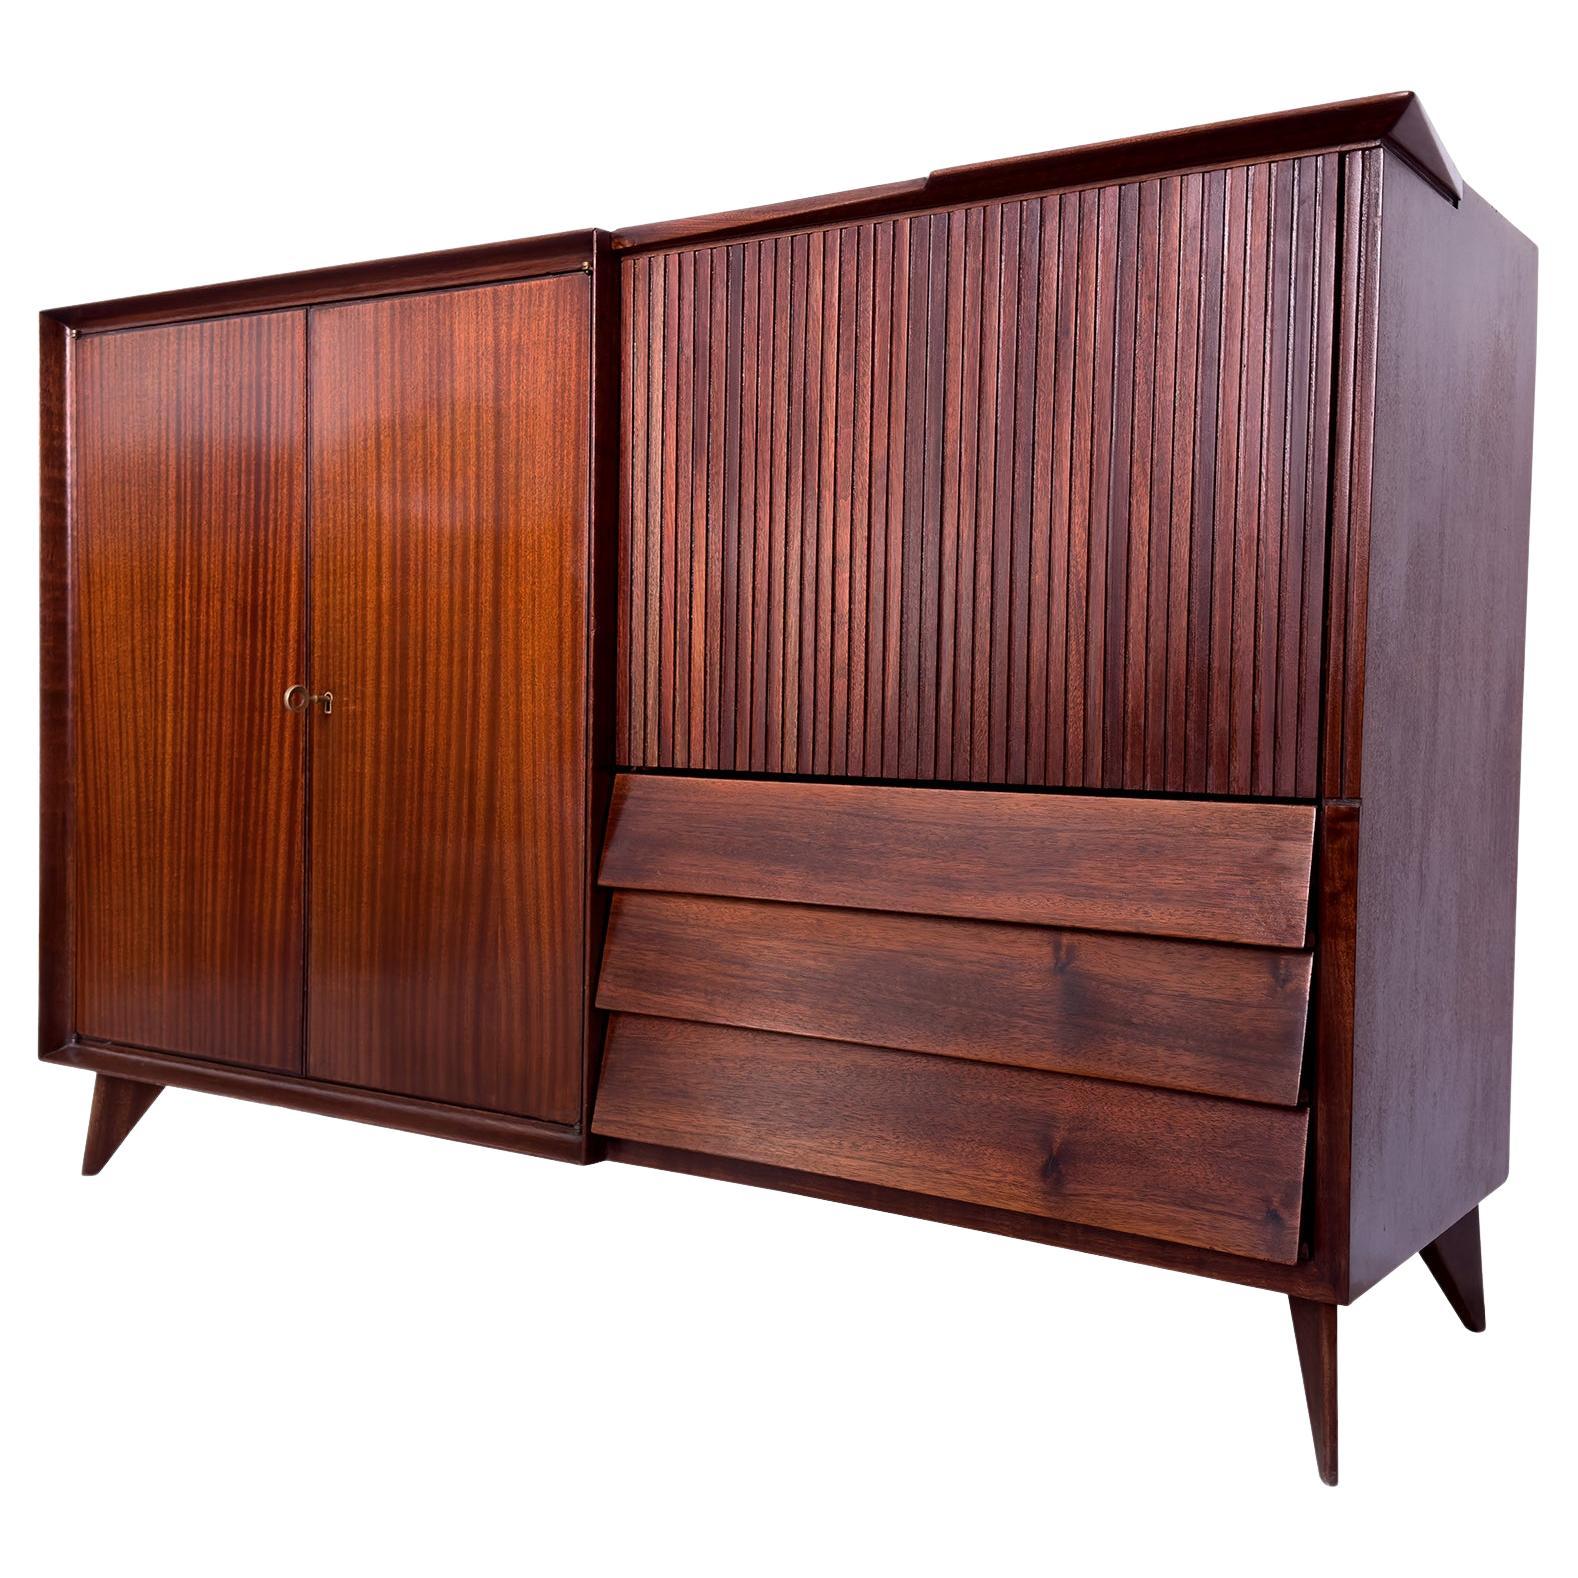 Italian Mid-Century Teak Wood Sideboard with Bar Cabinet by Vittorio Dassi, 1950s For Sale